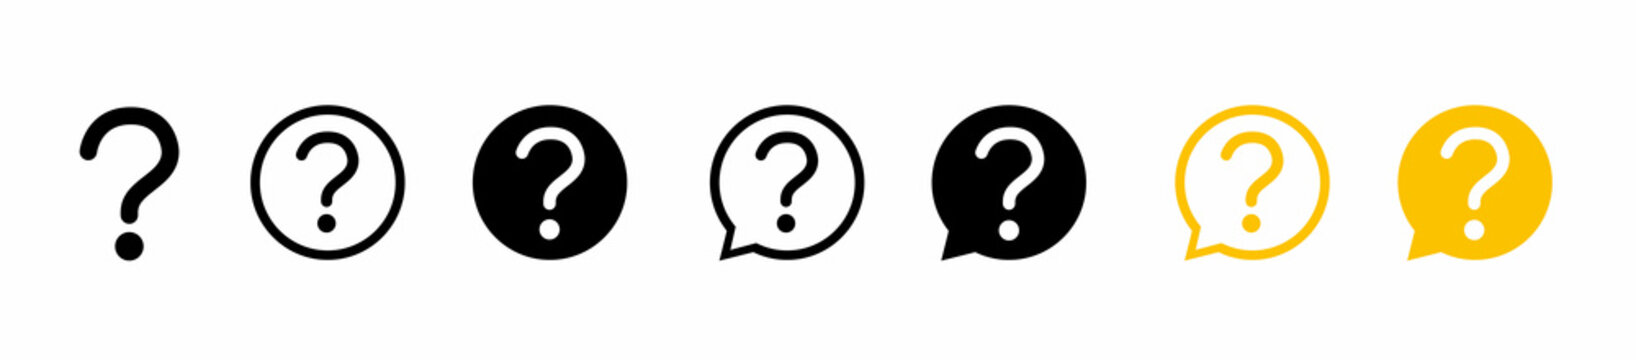 Question mark icon set. Message box with question mark icon. Button vector icon isolated on transparent background. Vector illustration